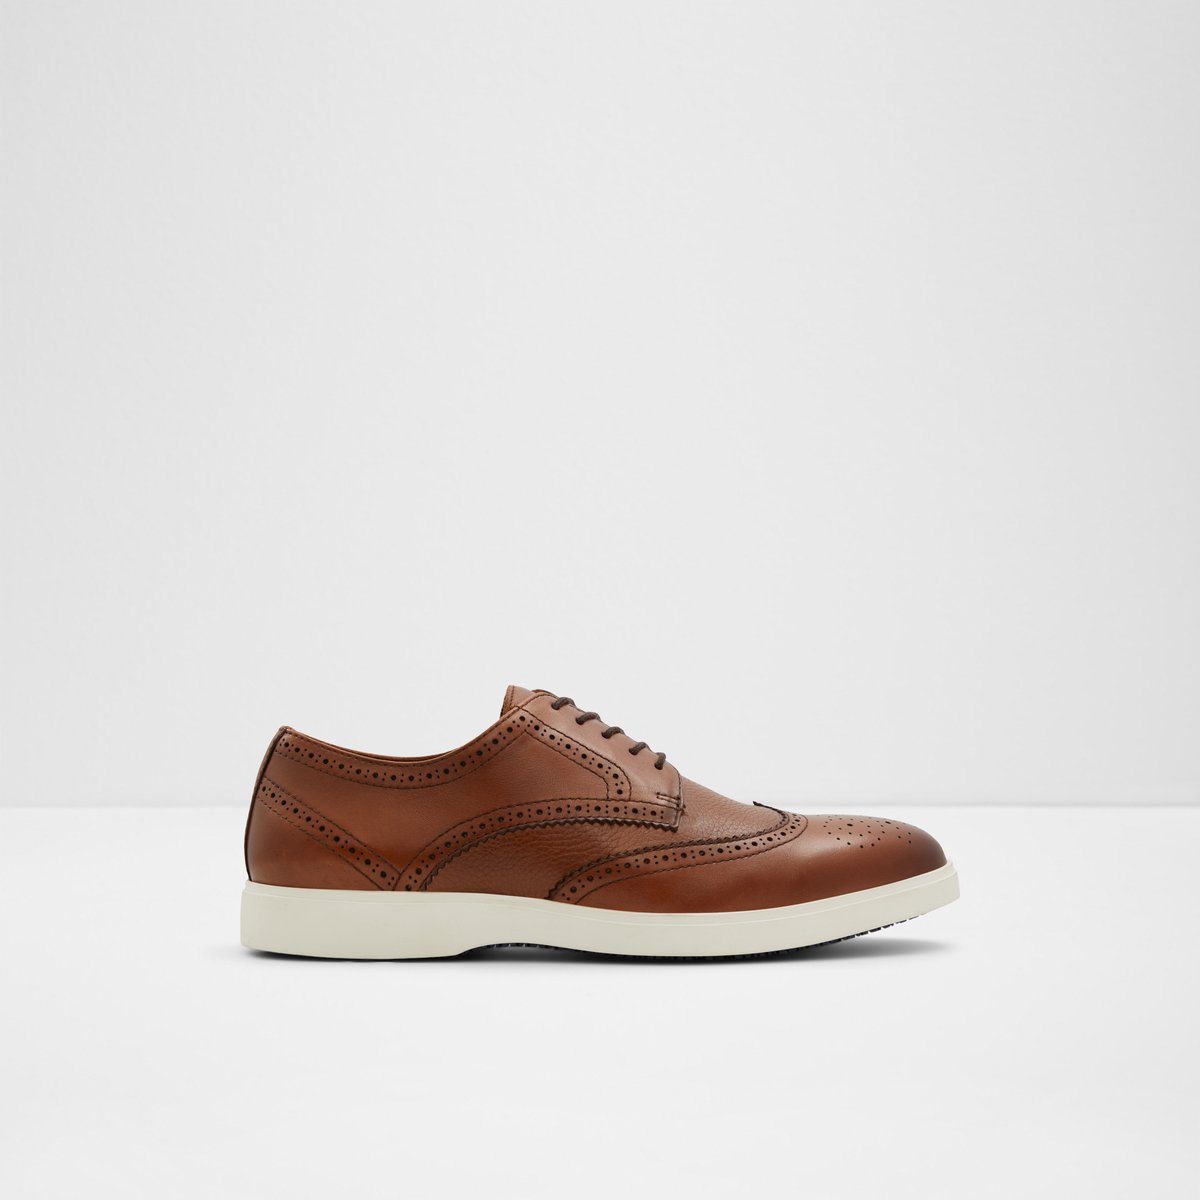 Wiser Oxford Shoes